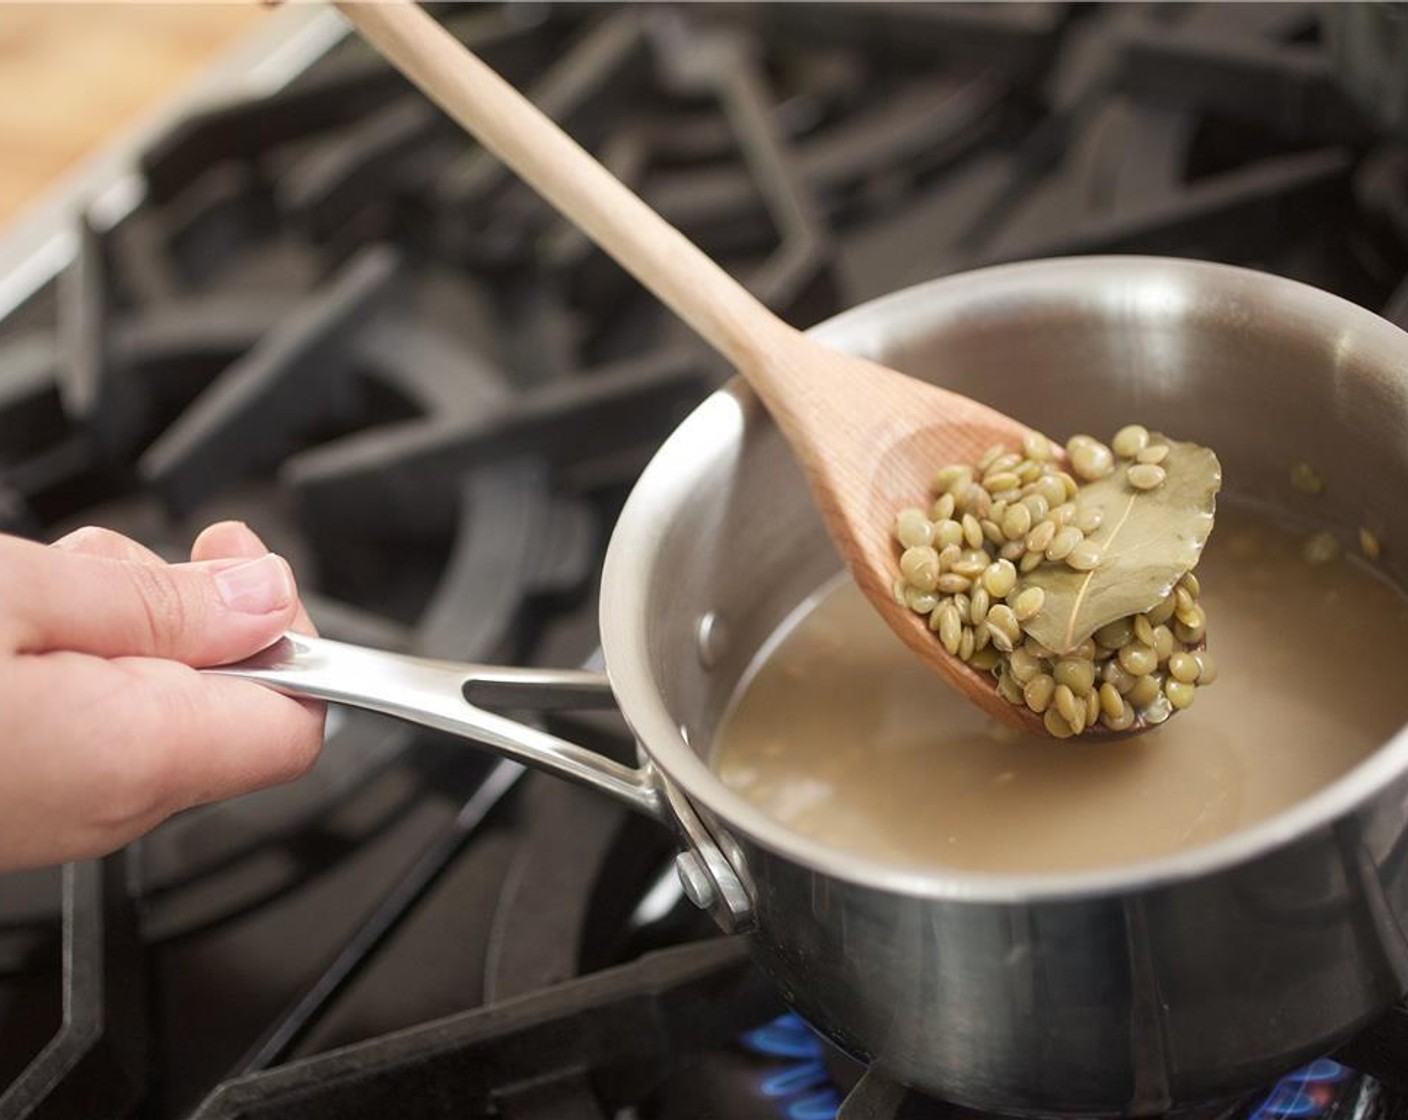 step 4 In a medium saucepan over medium high heat, add Green Lentils (2/3 cup), Bay Leaf (1), and two cups of cold water. Bring to a boil. Cover and lower heat to a simmer, cook for 14 minutes or until lentils are tender but not overcooked. Remove the bay leaf and discard.